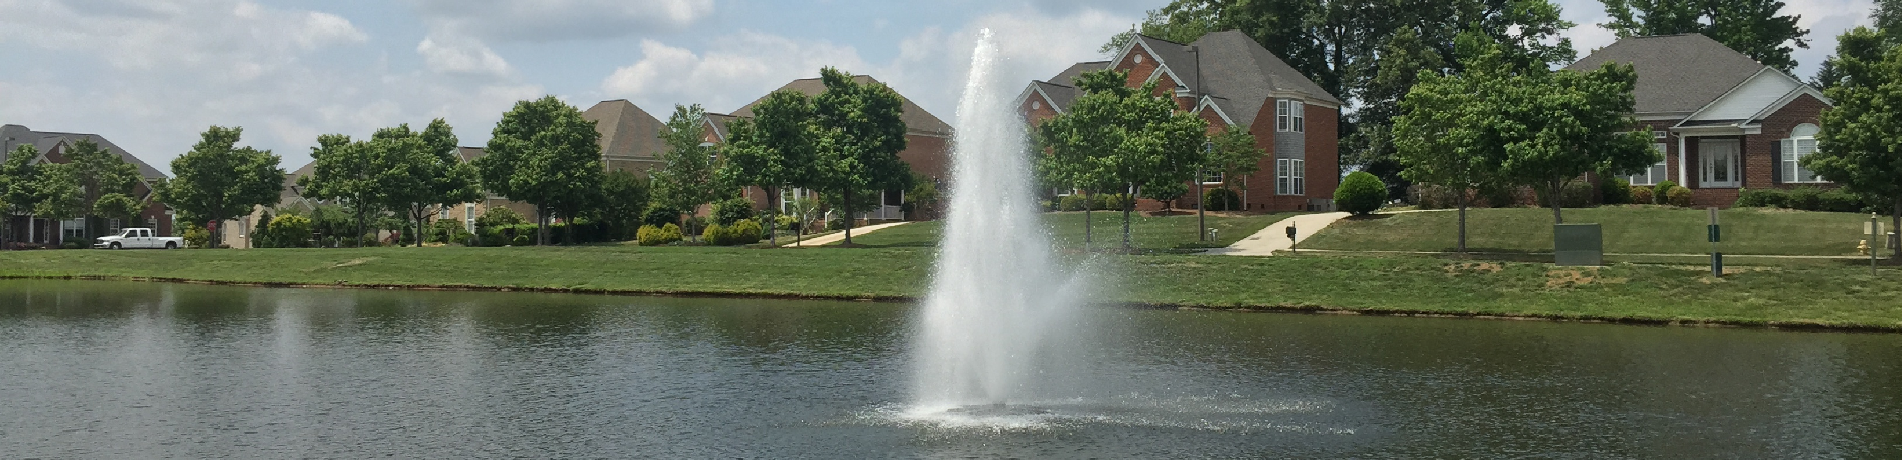 AquaMaster Fountains Celestial Series Lake Management Floating Fountains Aeration Irrigation Pump Systems Dallas Fort Worth Texas